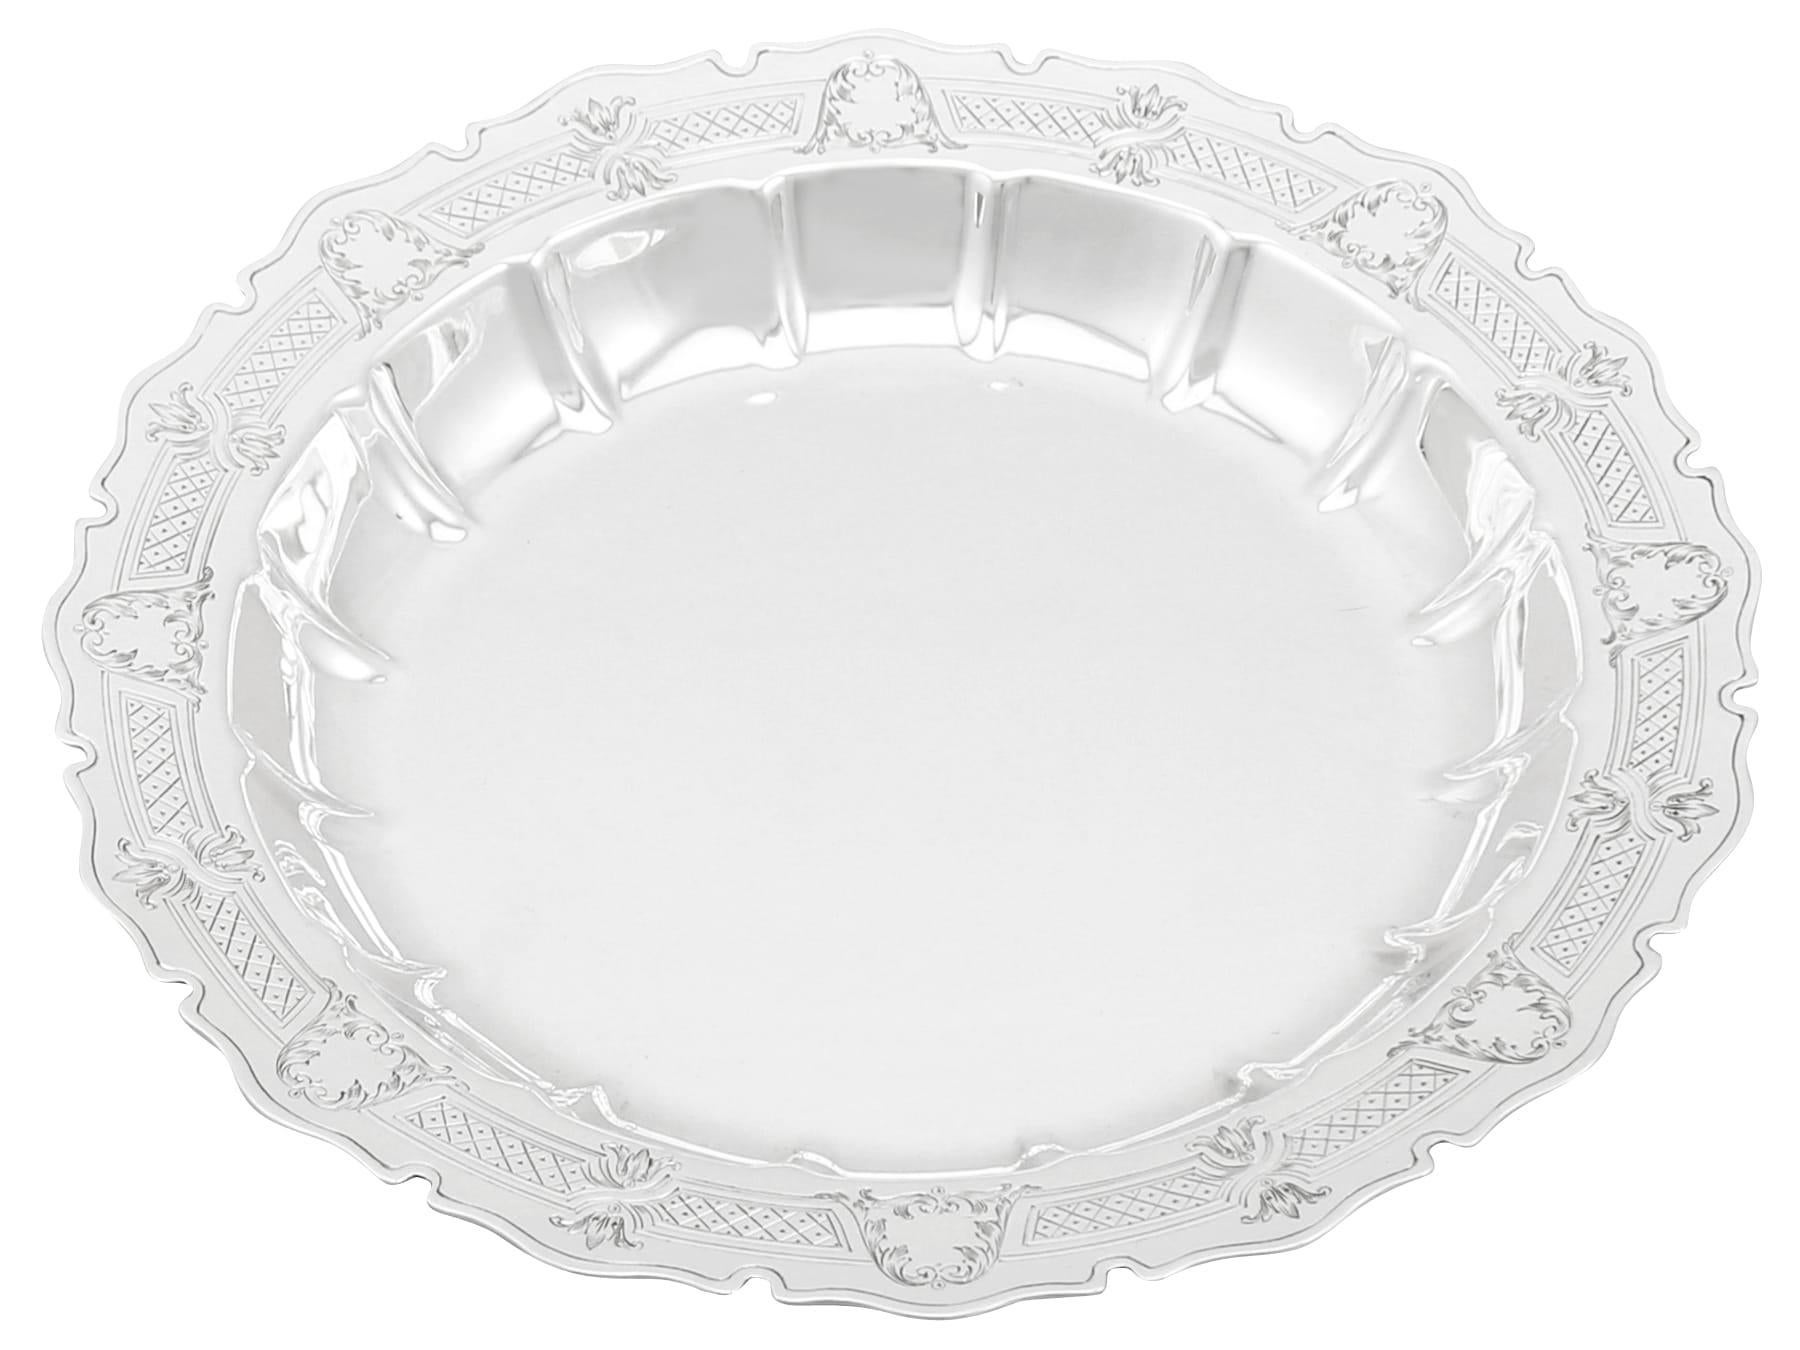 Mappin & Webb 1928 Antique Sterling Silver Strawberry Bowl and Serving Dish For Sale 1